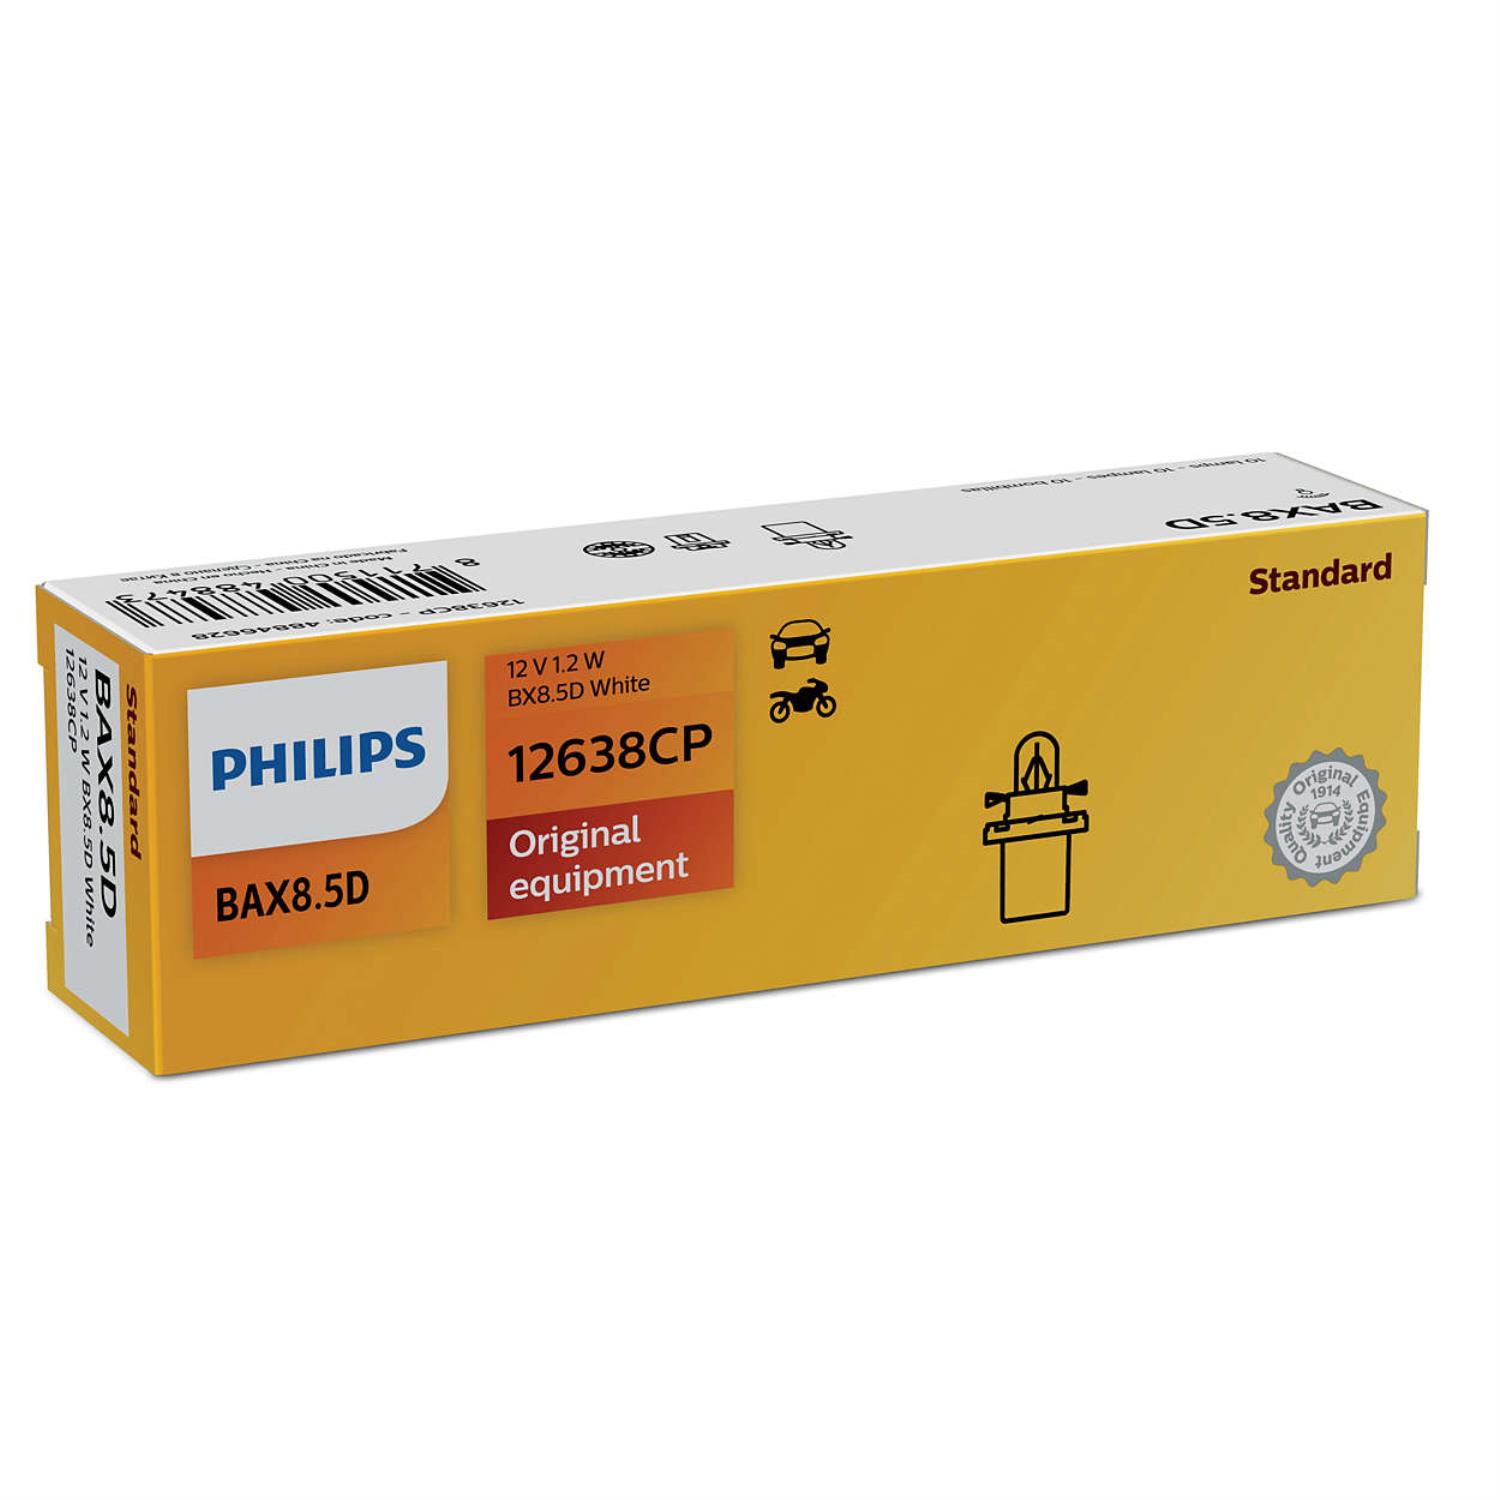 PHILIPS 12638CP Glühlampe Beleuchtung